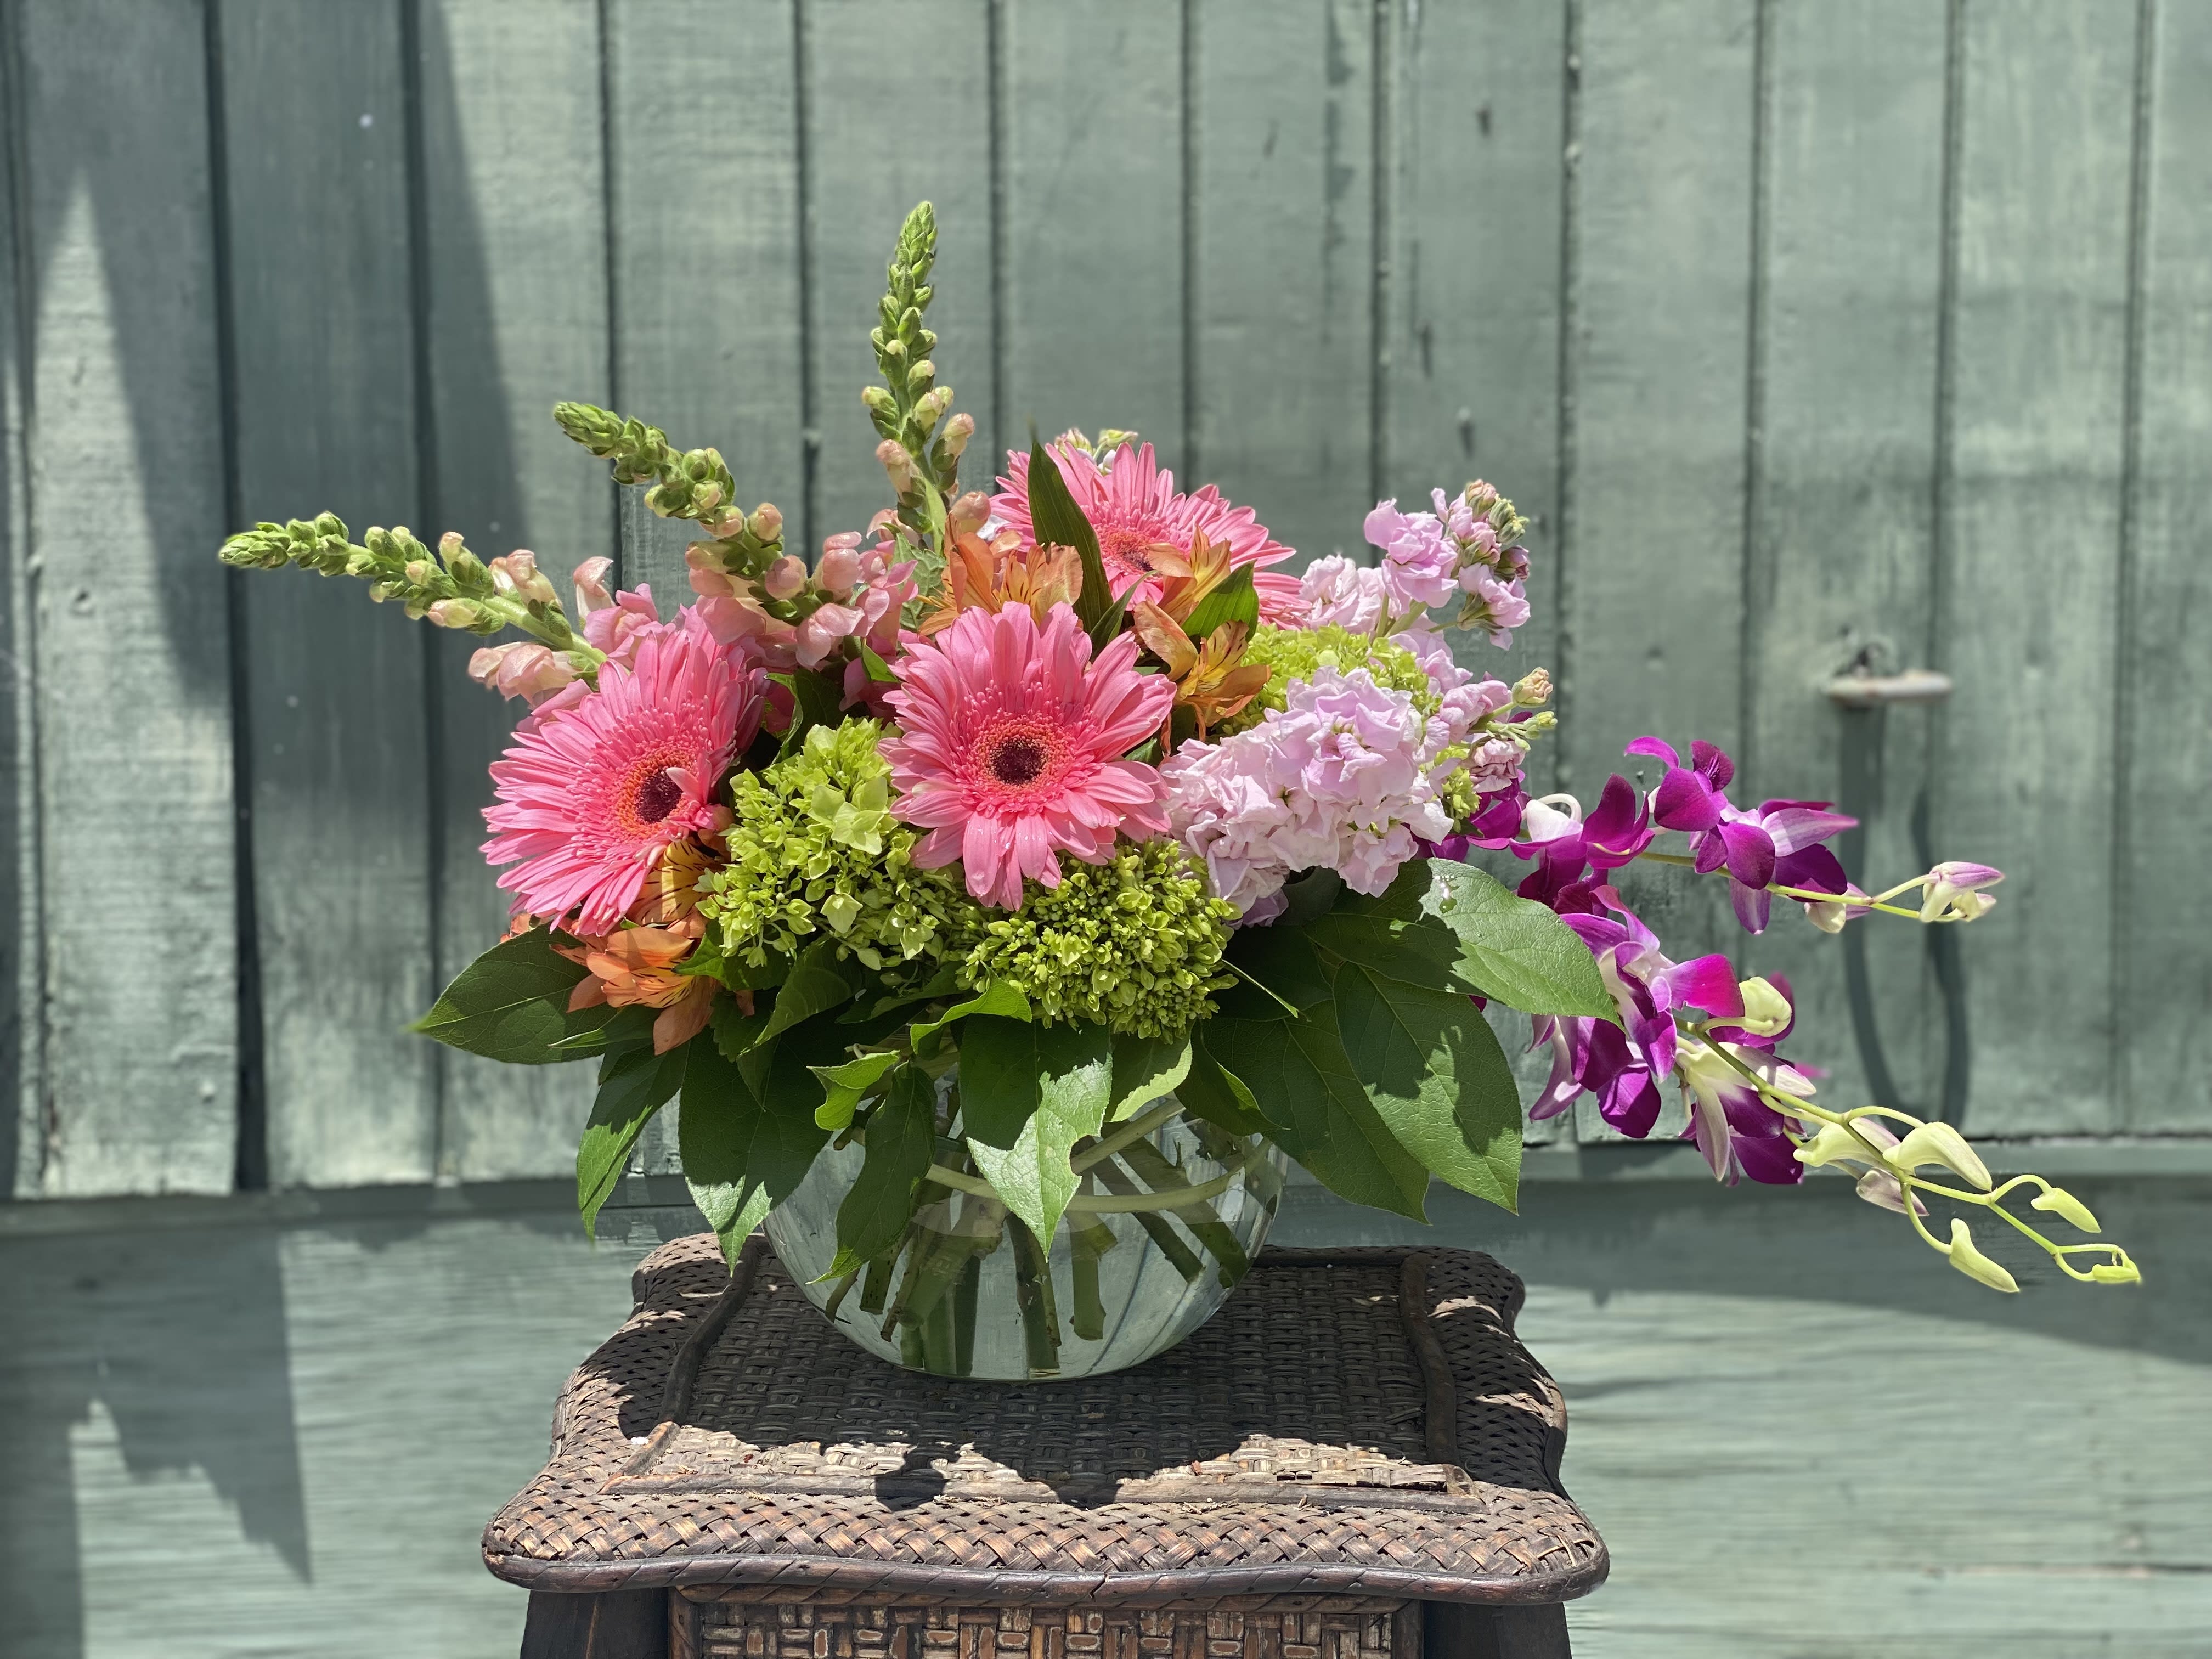 Bursting Beauty - Bowl full of fresh spring flowers, hydrangea, orchids, gerbera daisies and more.